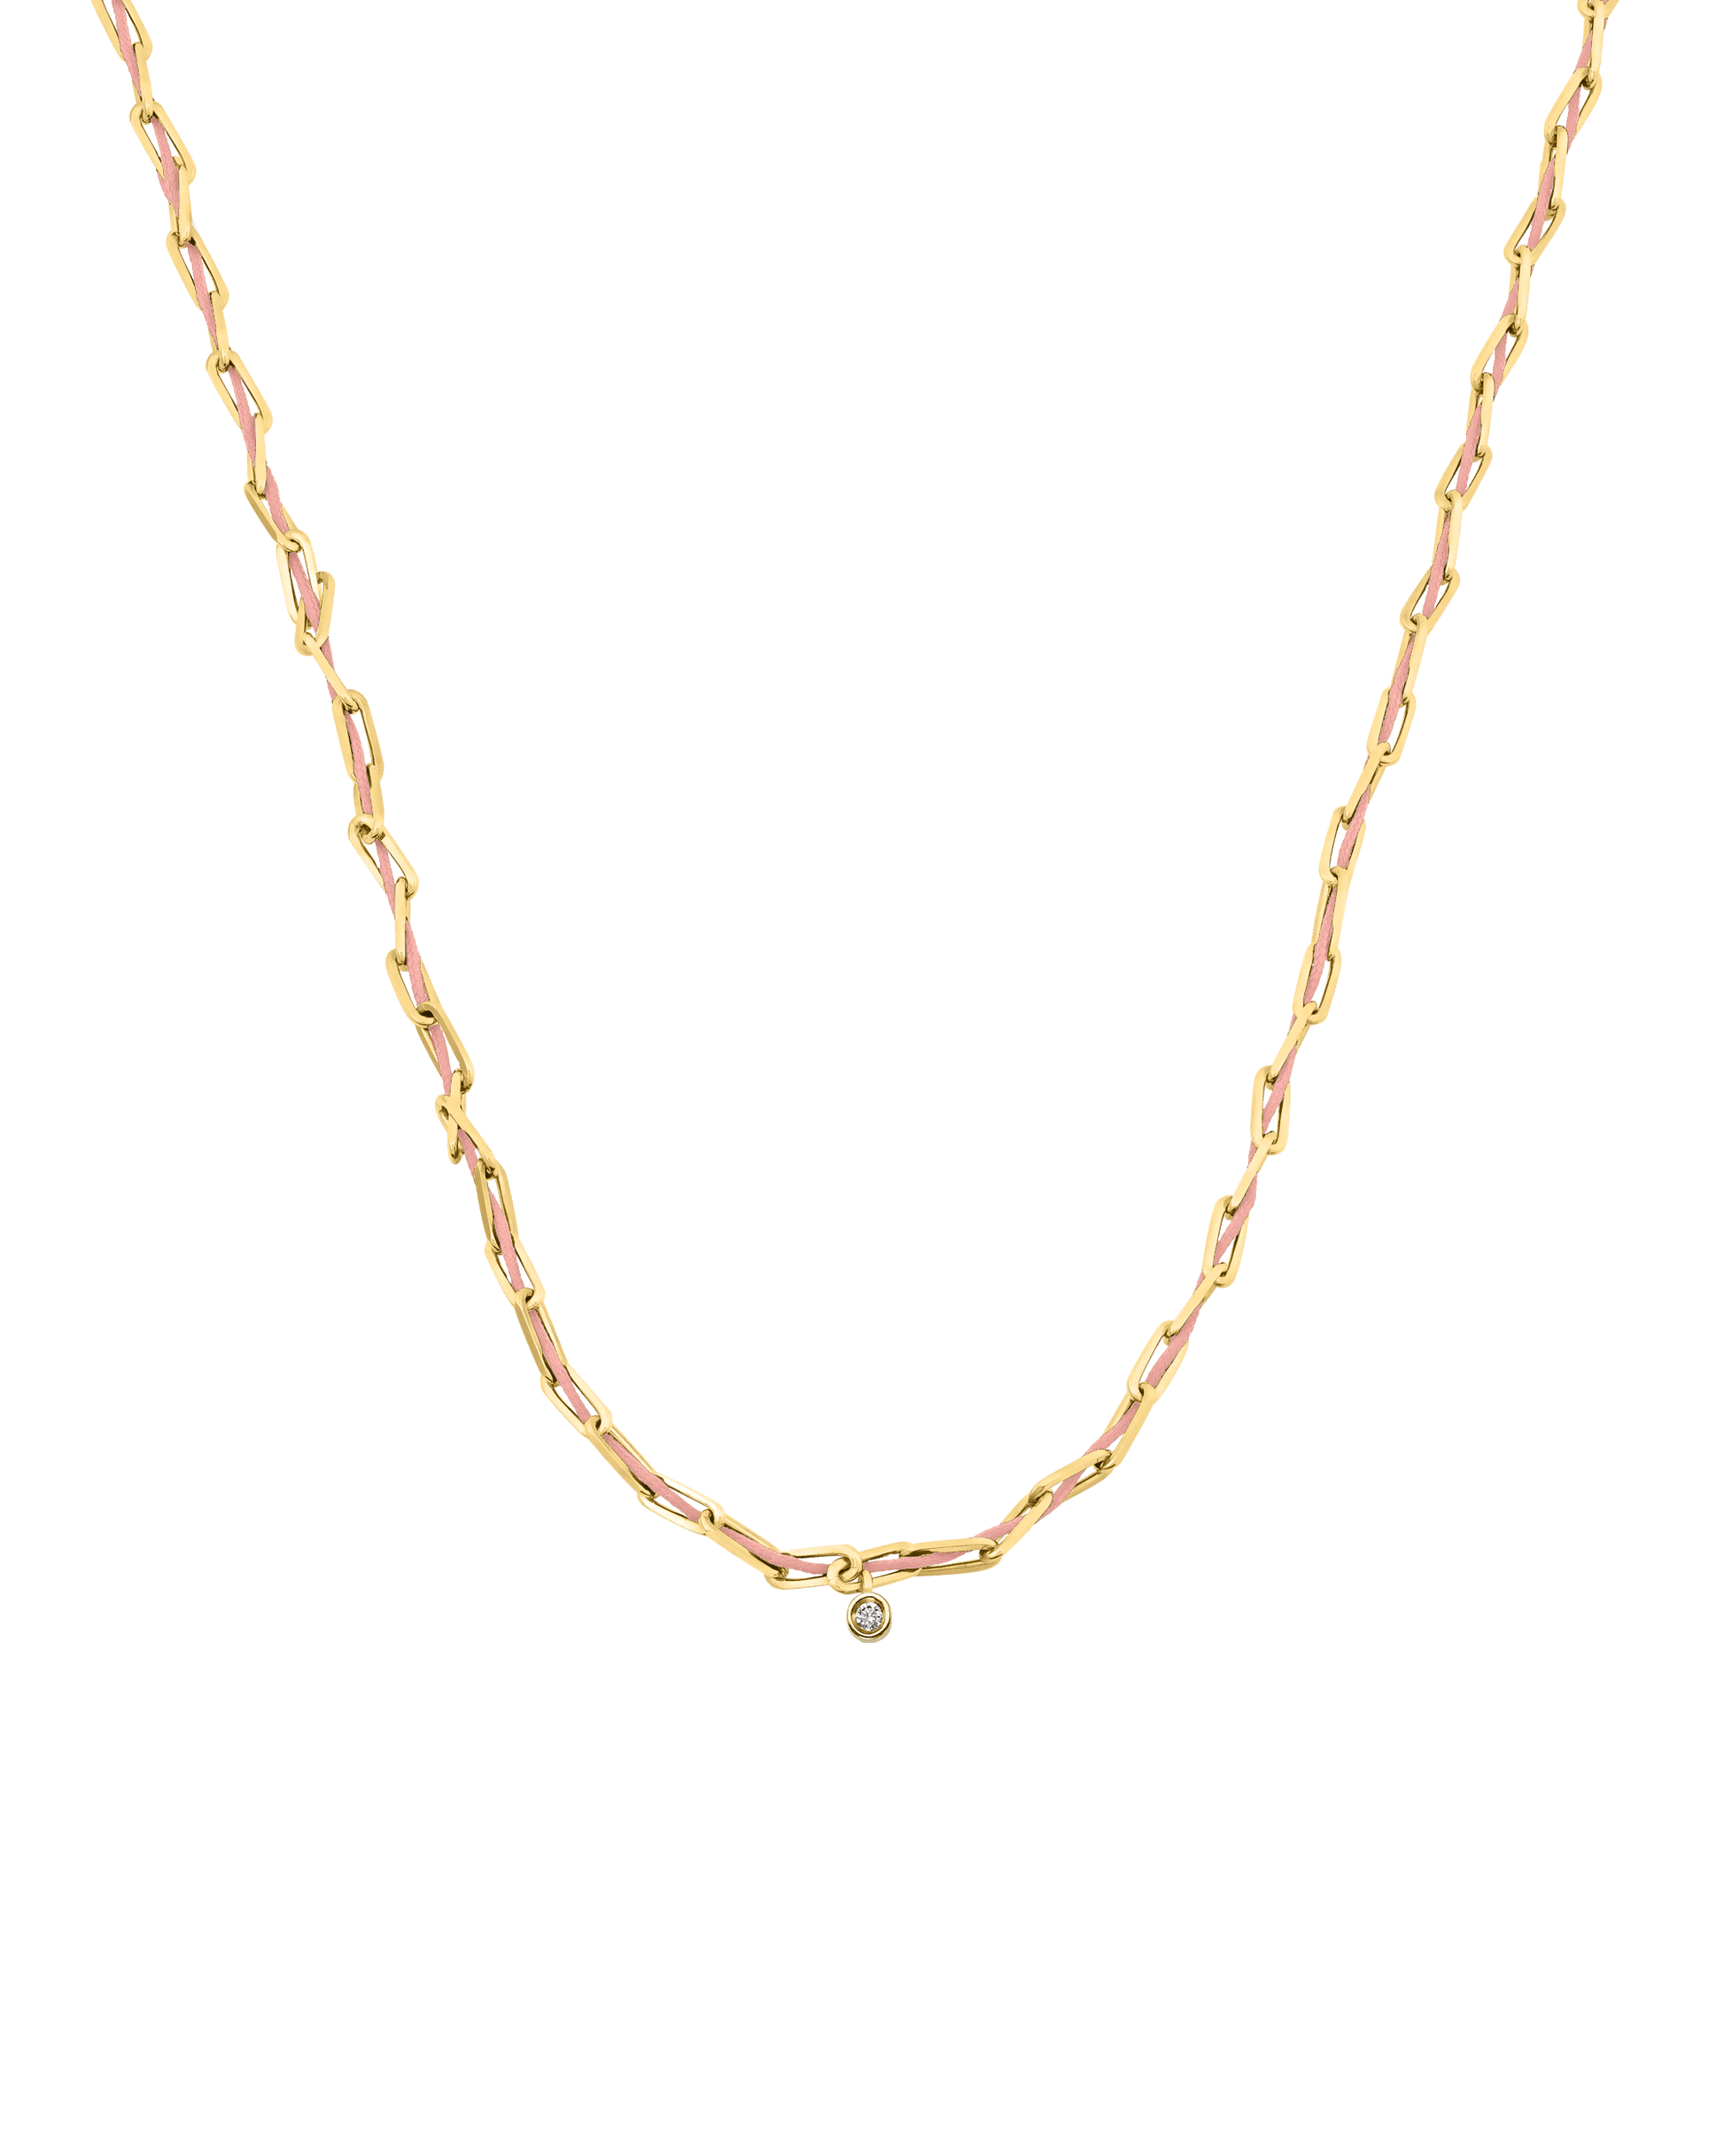 Pink : Twine Diamond Necklace - 18K Gold Vermeil Necklaces magal-dev Flamingo Small: 0.03ct 16"